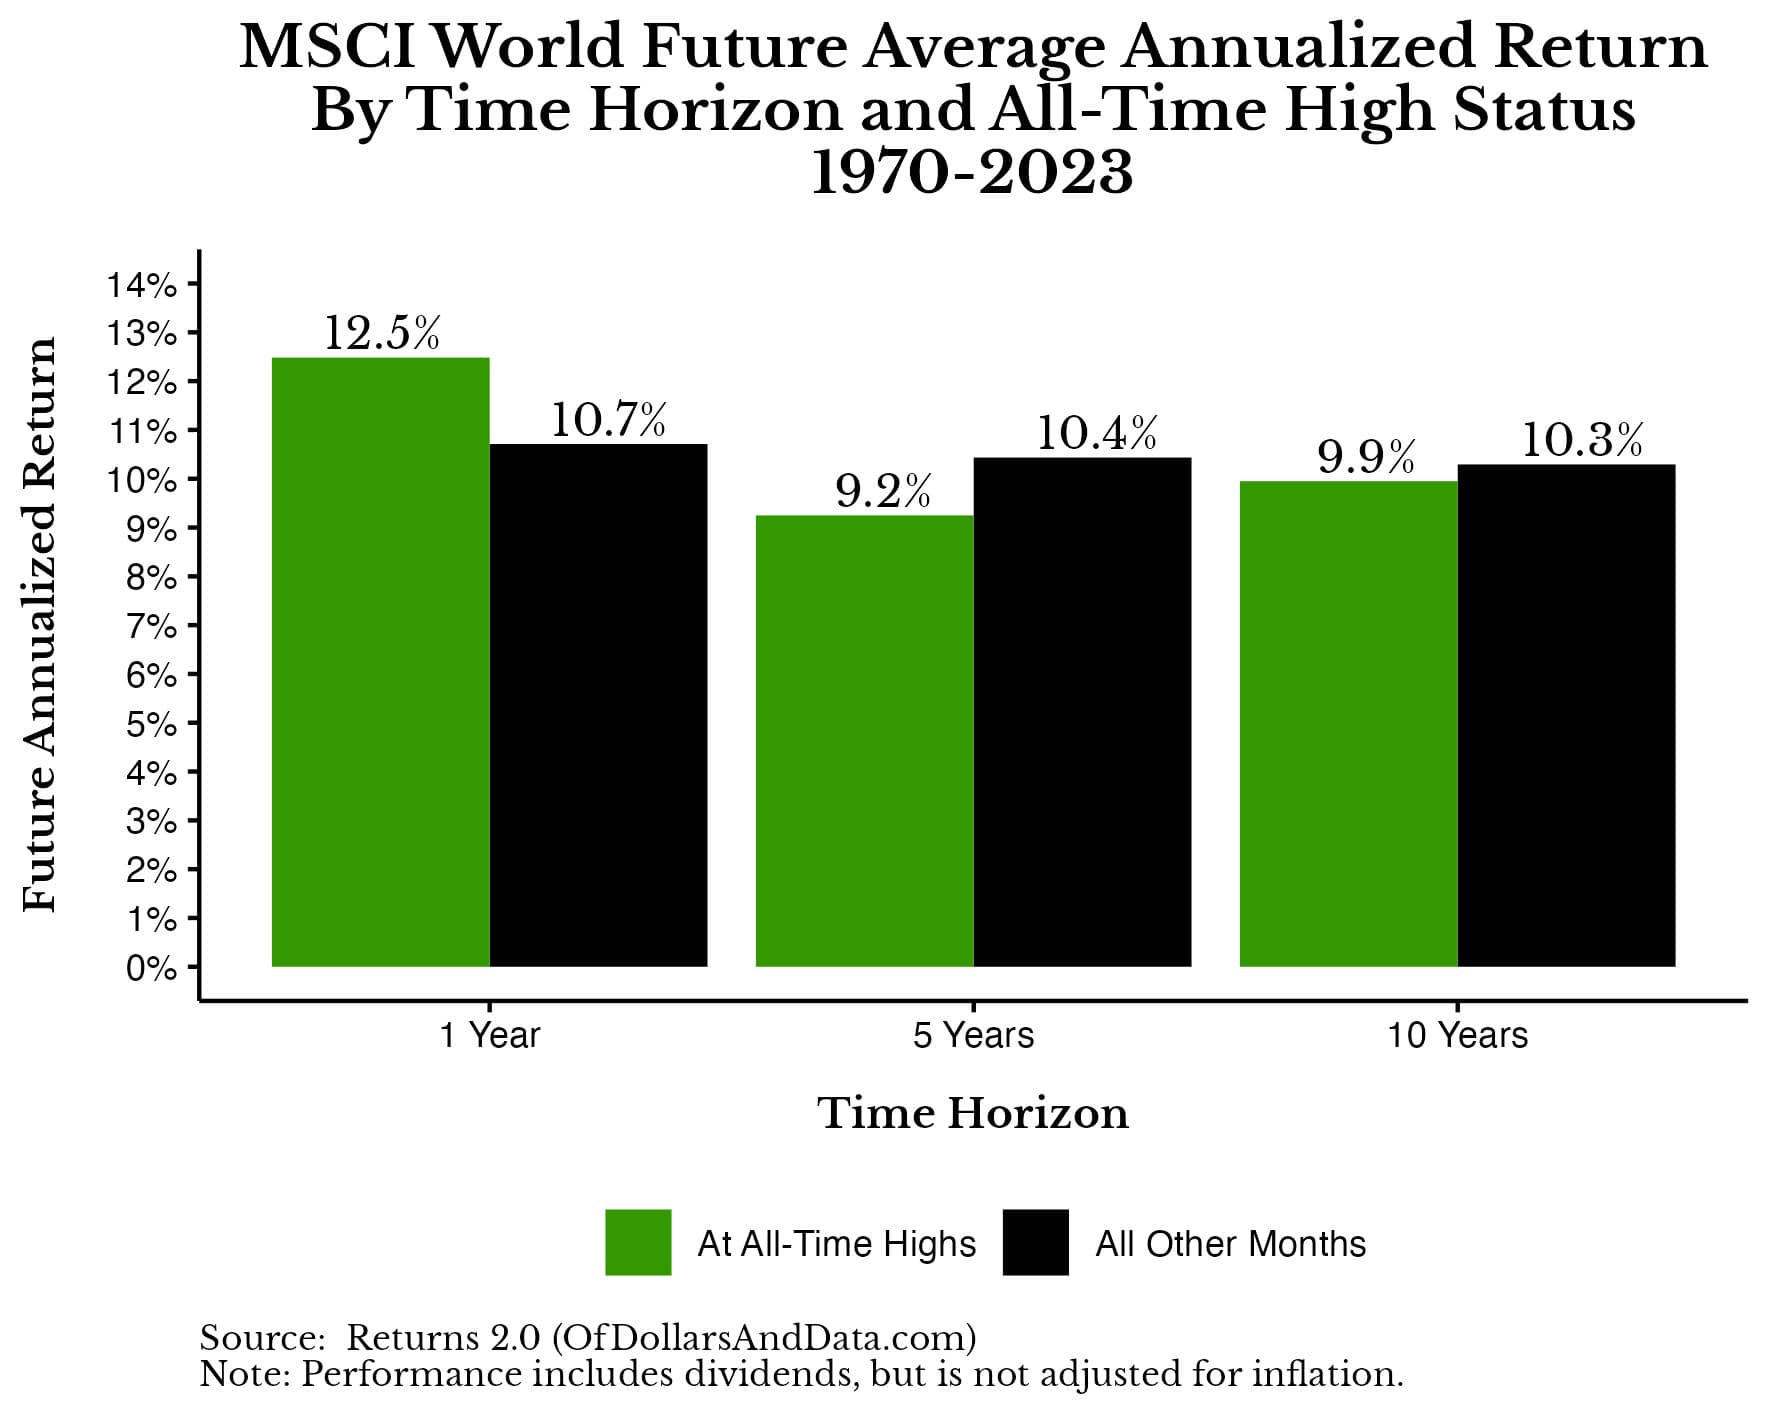 MSCI World future annualized returns by time horizon and all-time high status from 1970-2023.